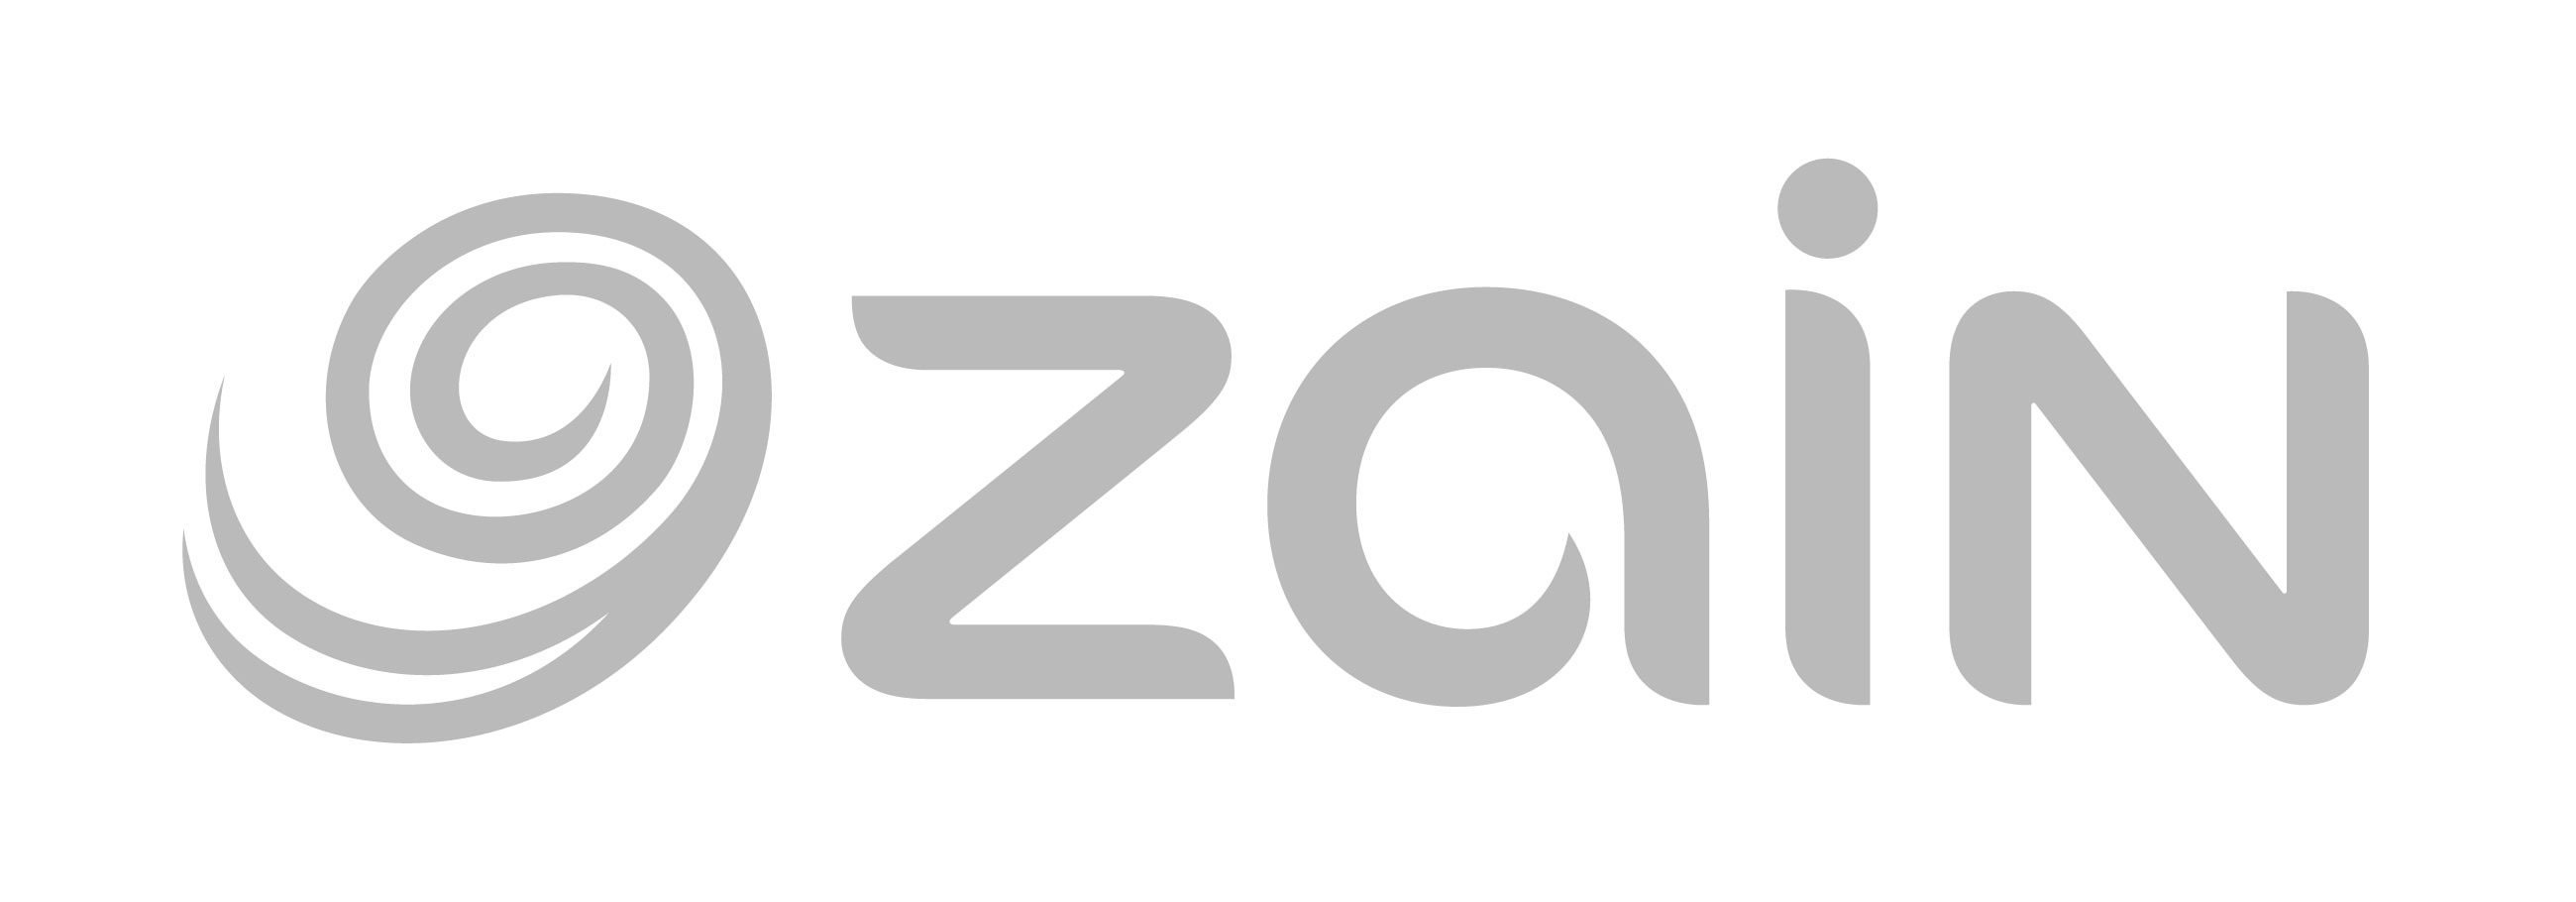 Zain teams up with Amazon Prime Video